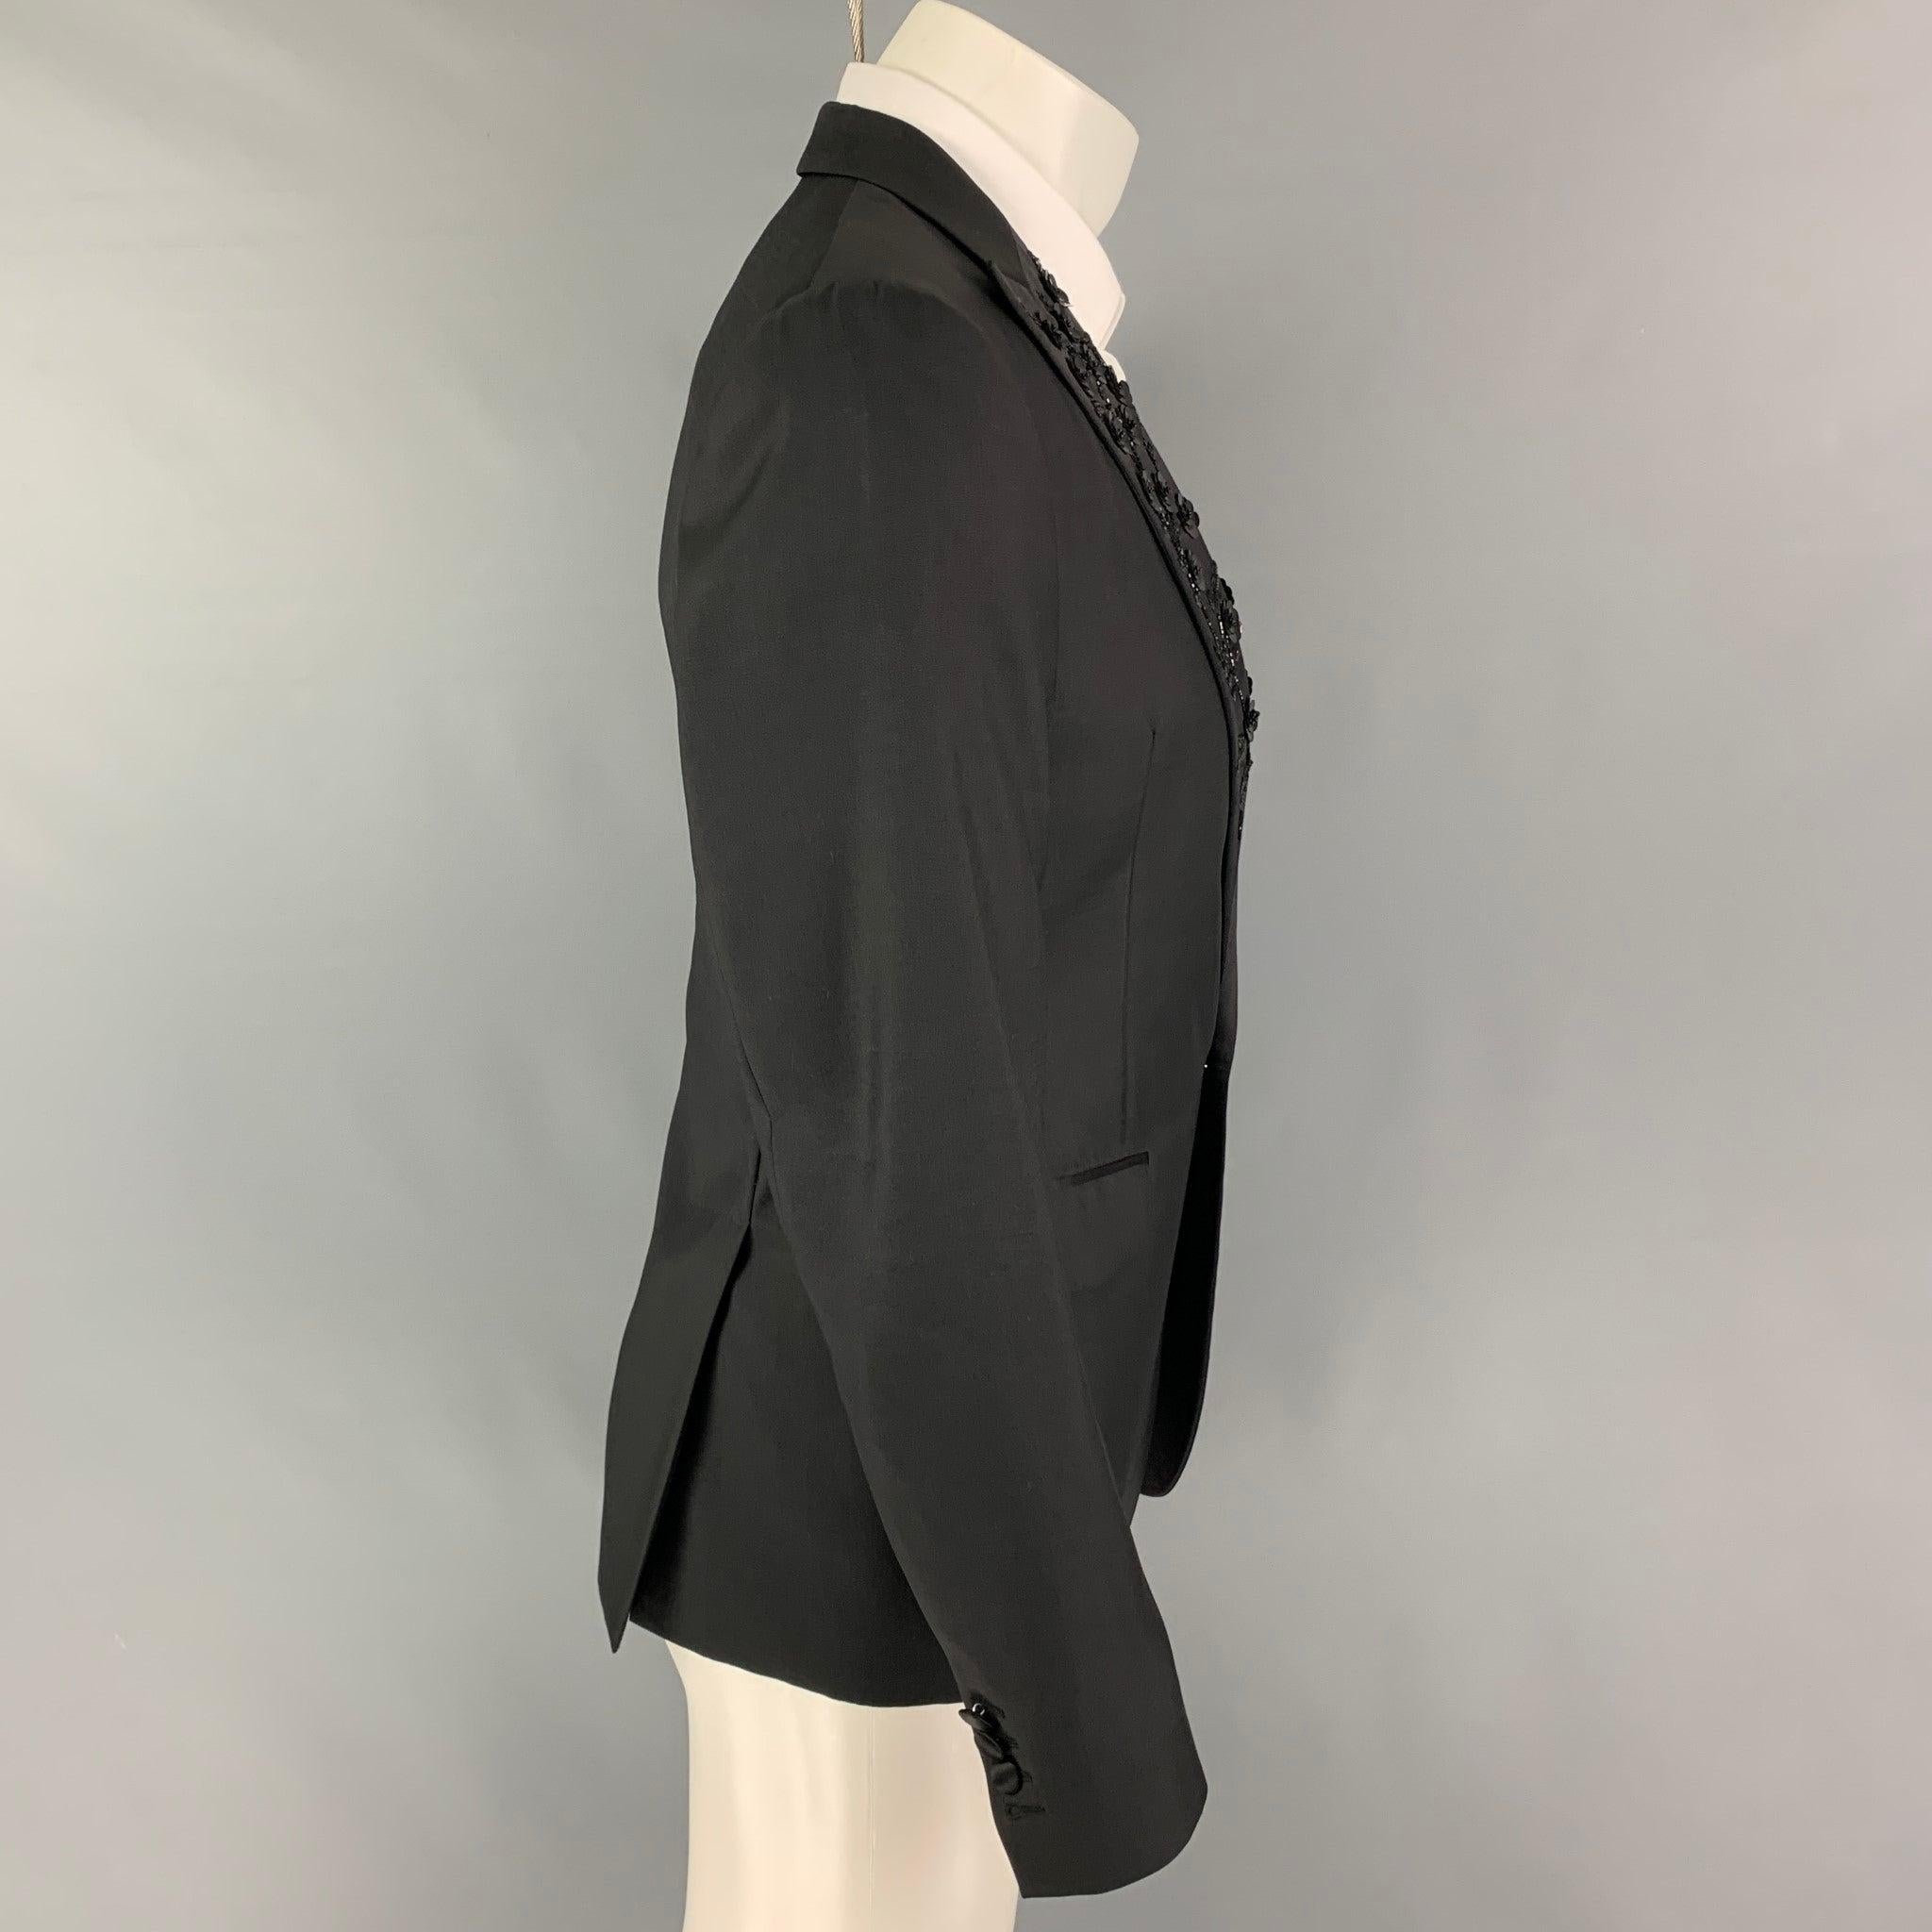 DSQUARED2 sport coat comes in a black wool / silk with a full liner featuring a floral sequined peak lapel, flap pockets,double back vent, anda single button closure. Made in Italy.
Excellent
Pre-Owned Condition. 

Marked:   48 

Measurements: 
